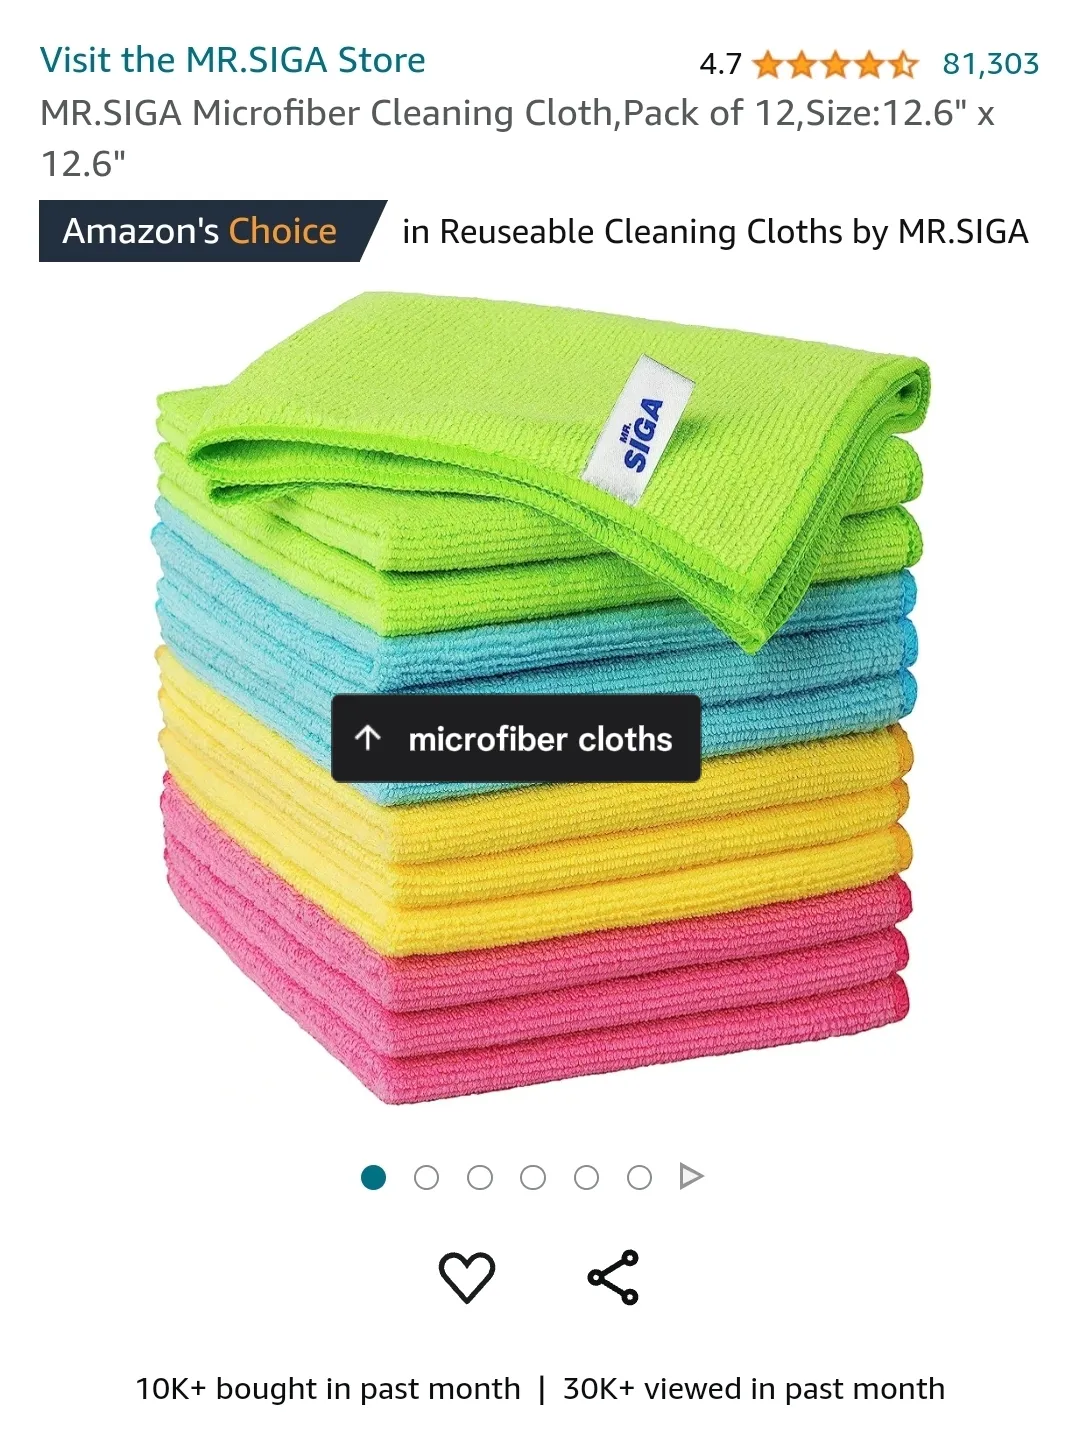 Wholesale MR.SIGA Microfiber Cleaning Cloth, Pack of 24, Size:12.6 x 12.6